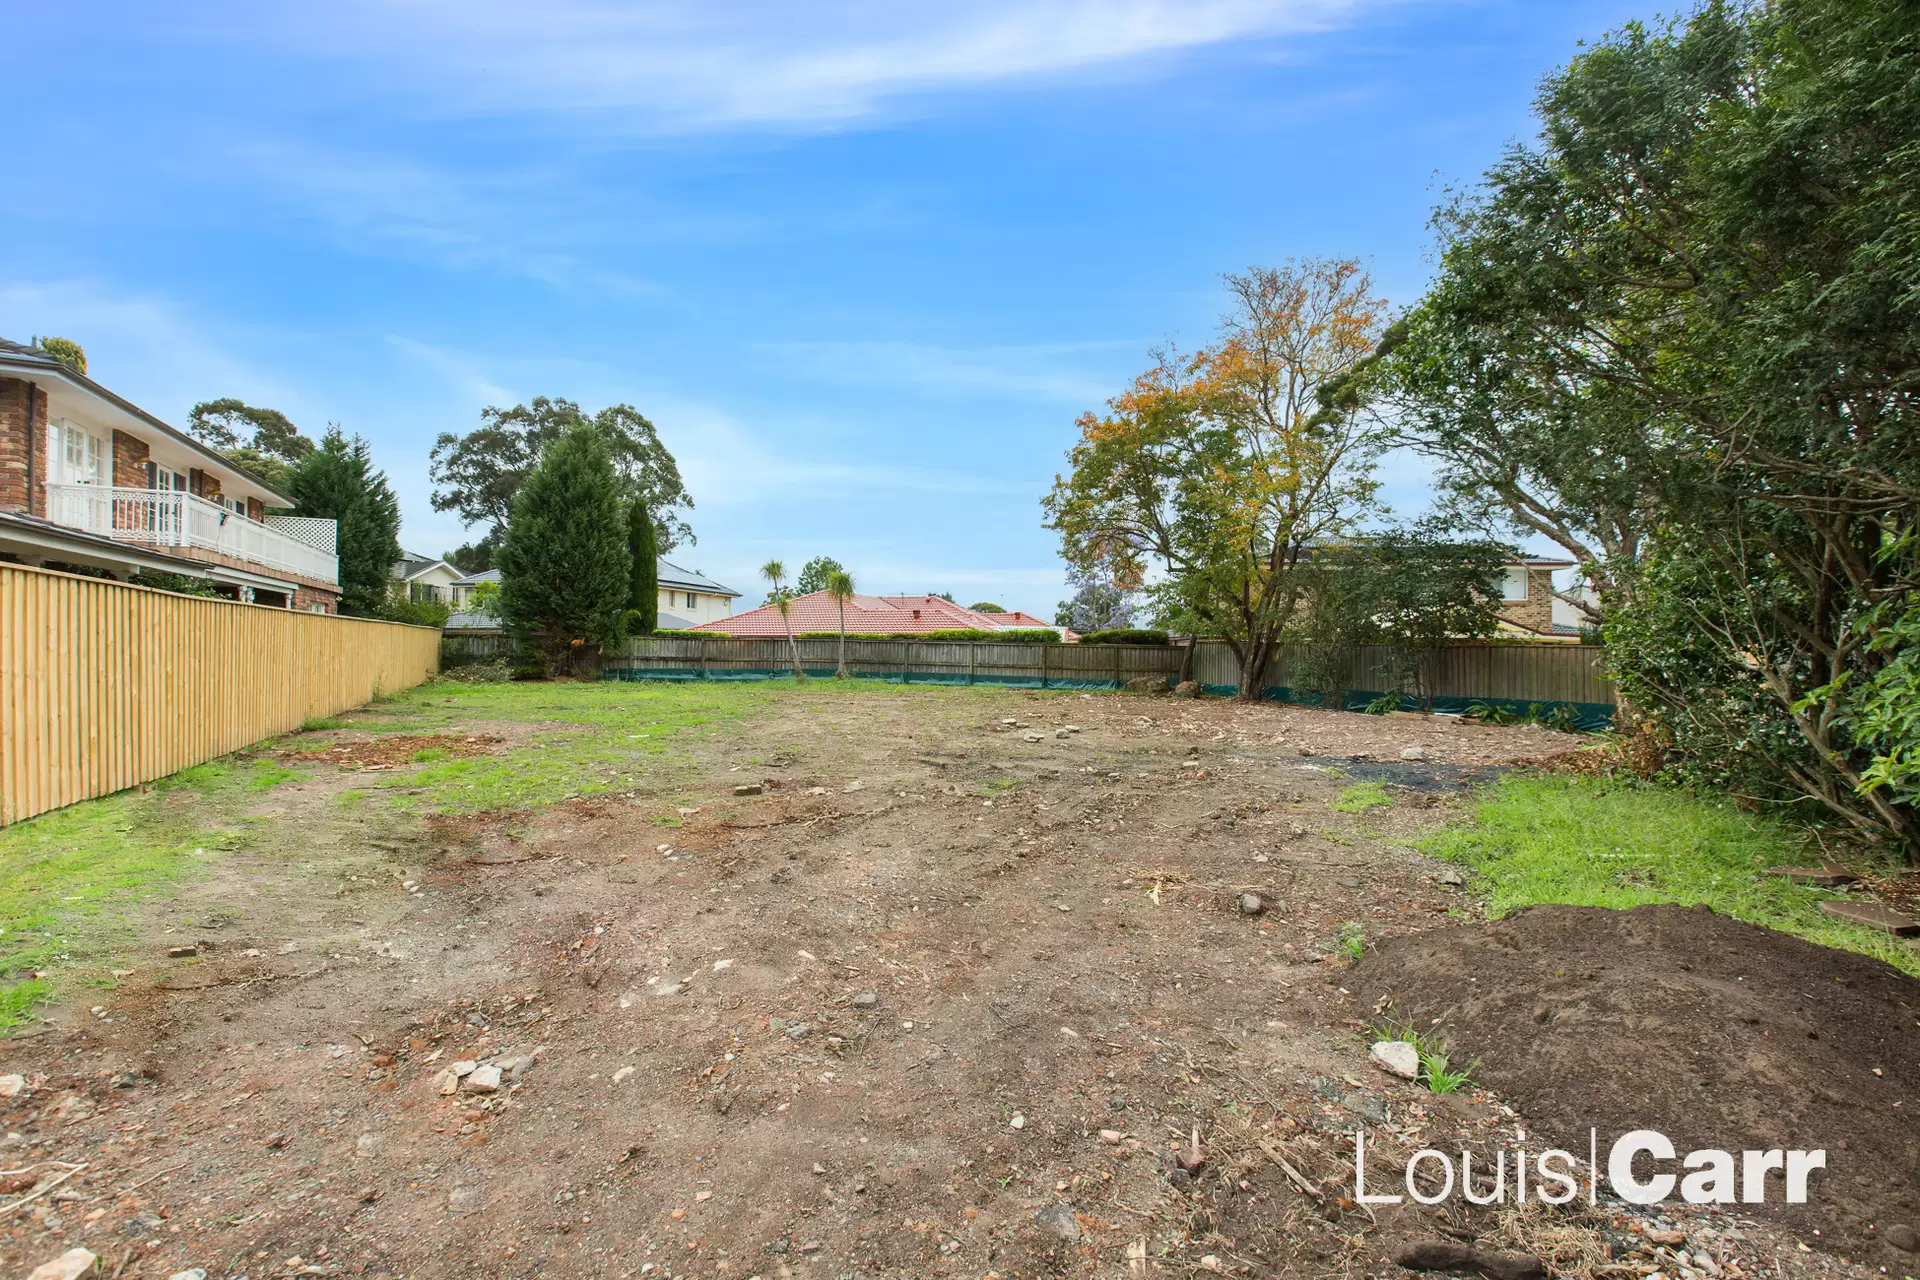 Photo #1: 2A Gumnut Road, Cherrybrook - For Sale by Louis Carr Real Estate